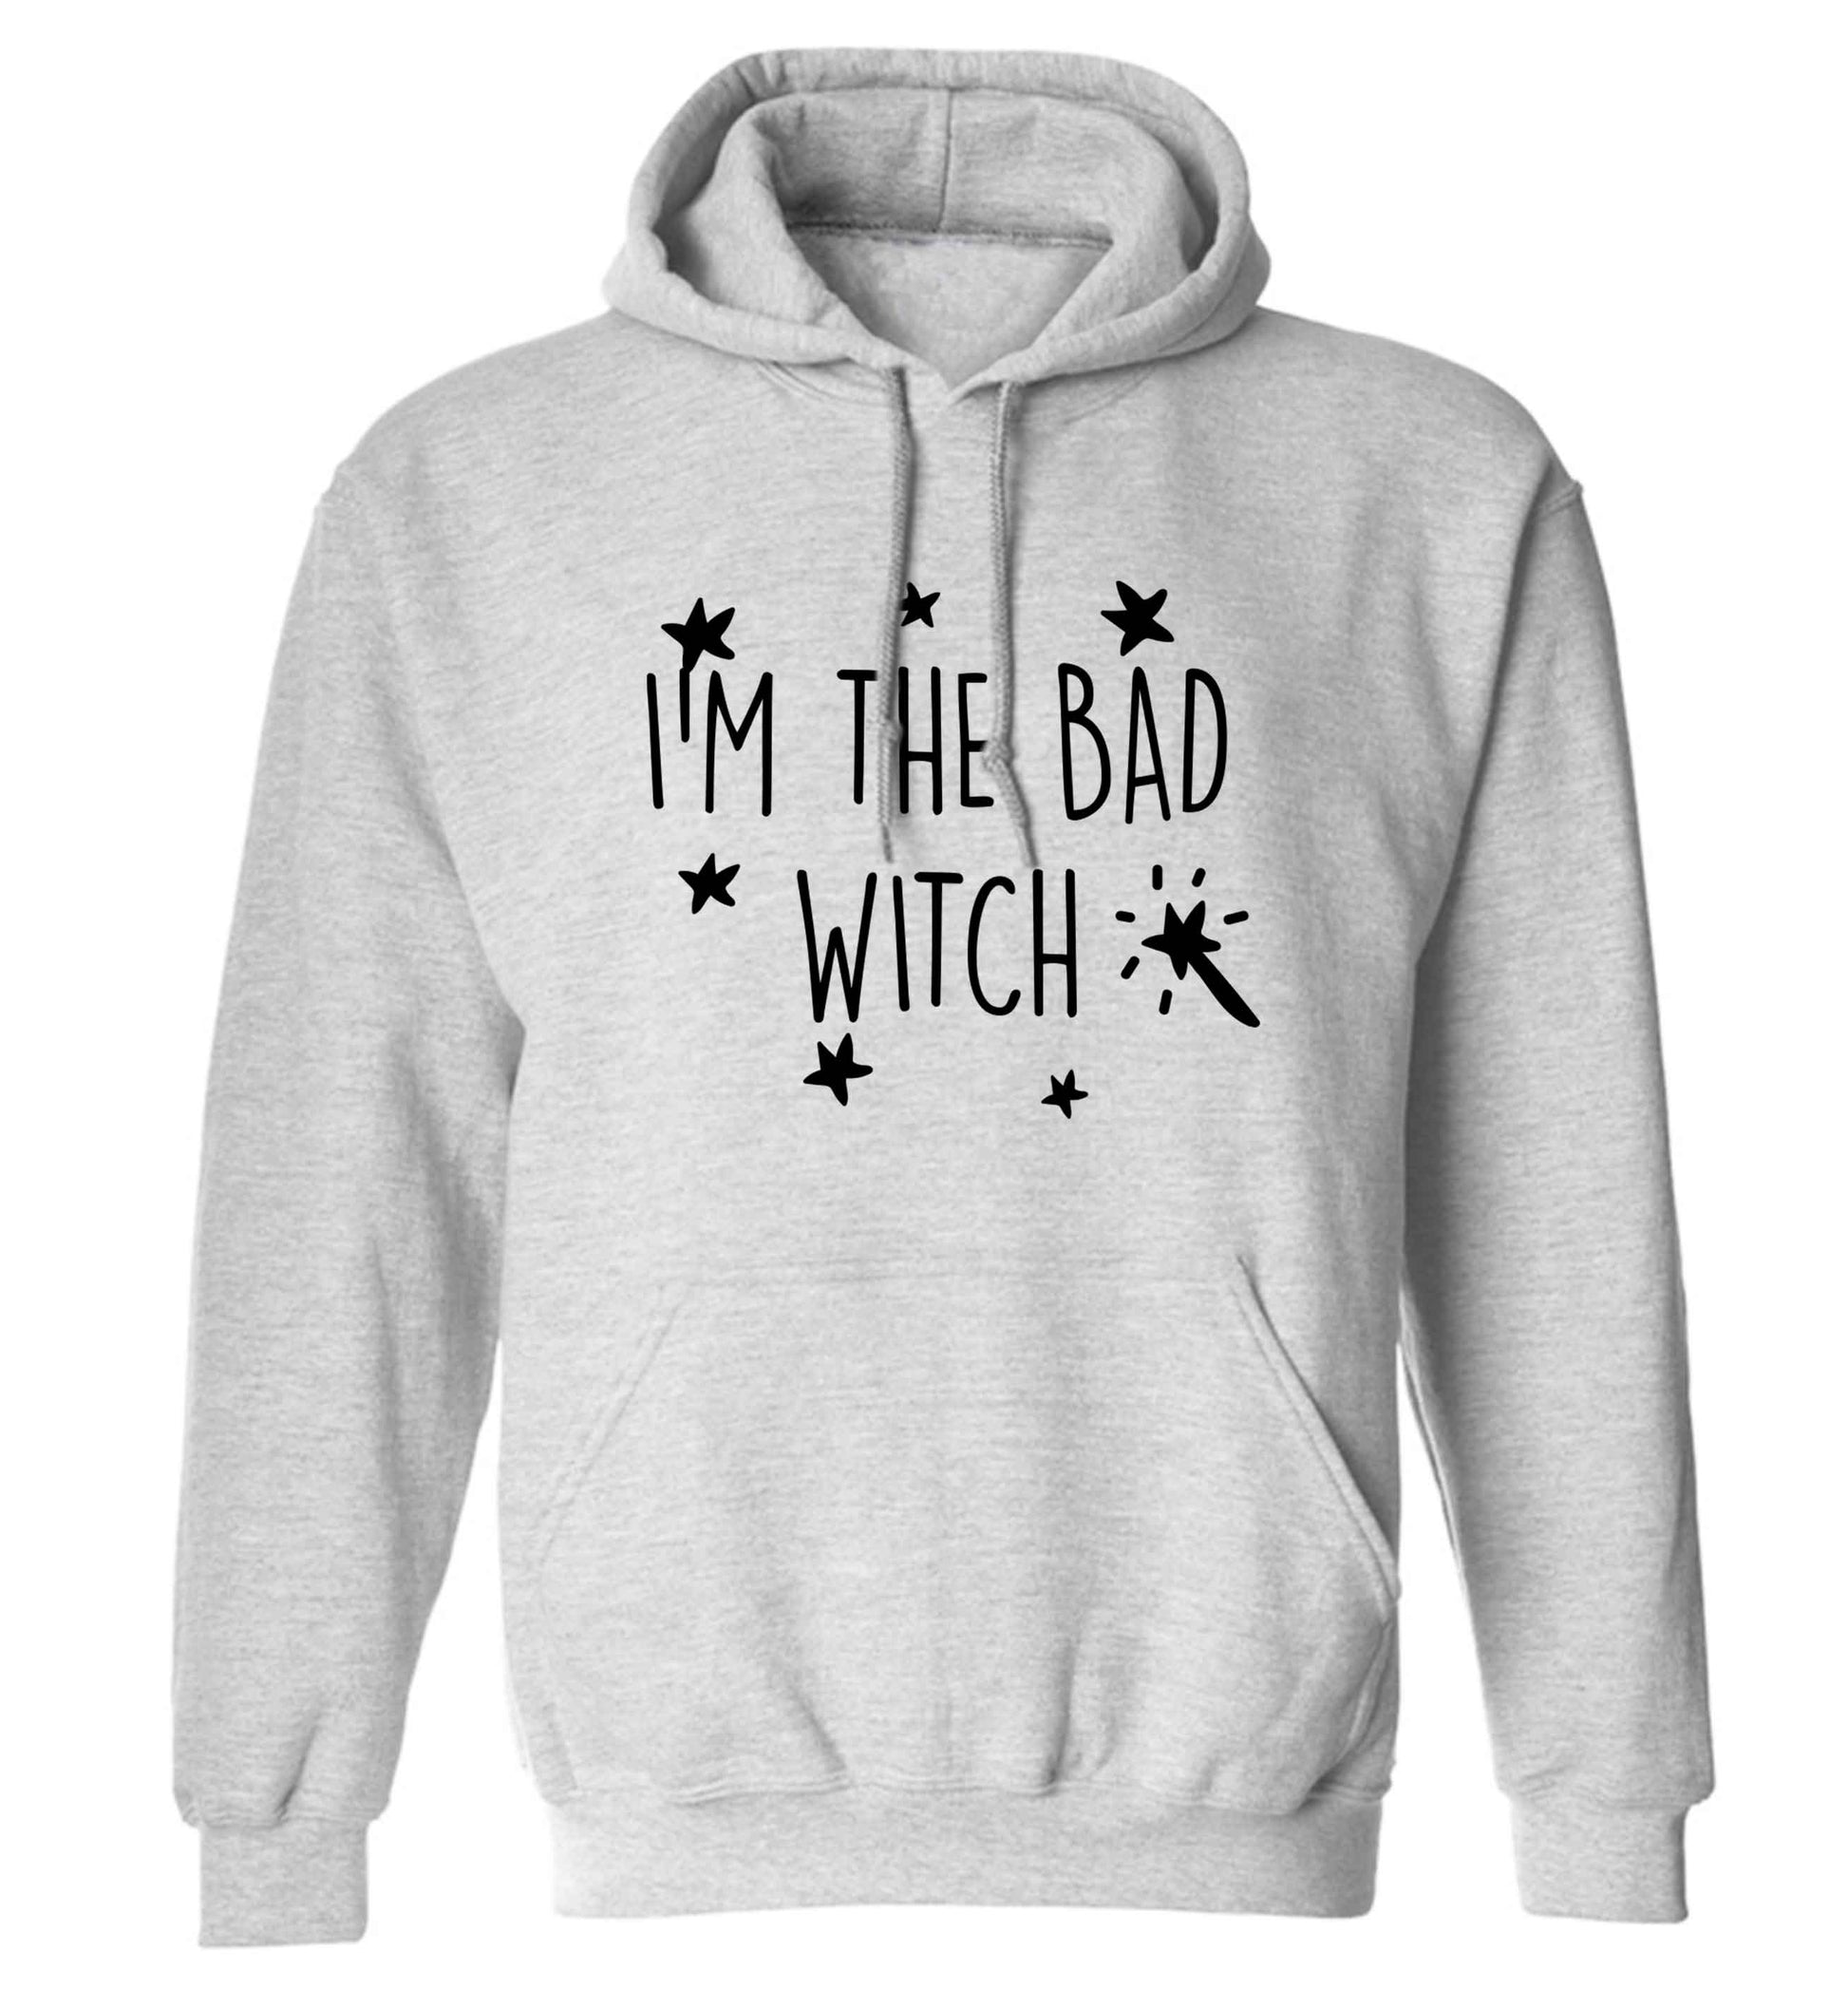 Bad witch adults unisex grey hoodie 2XL